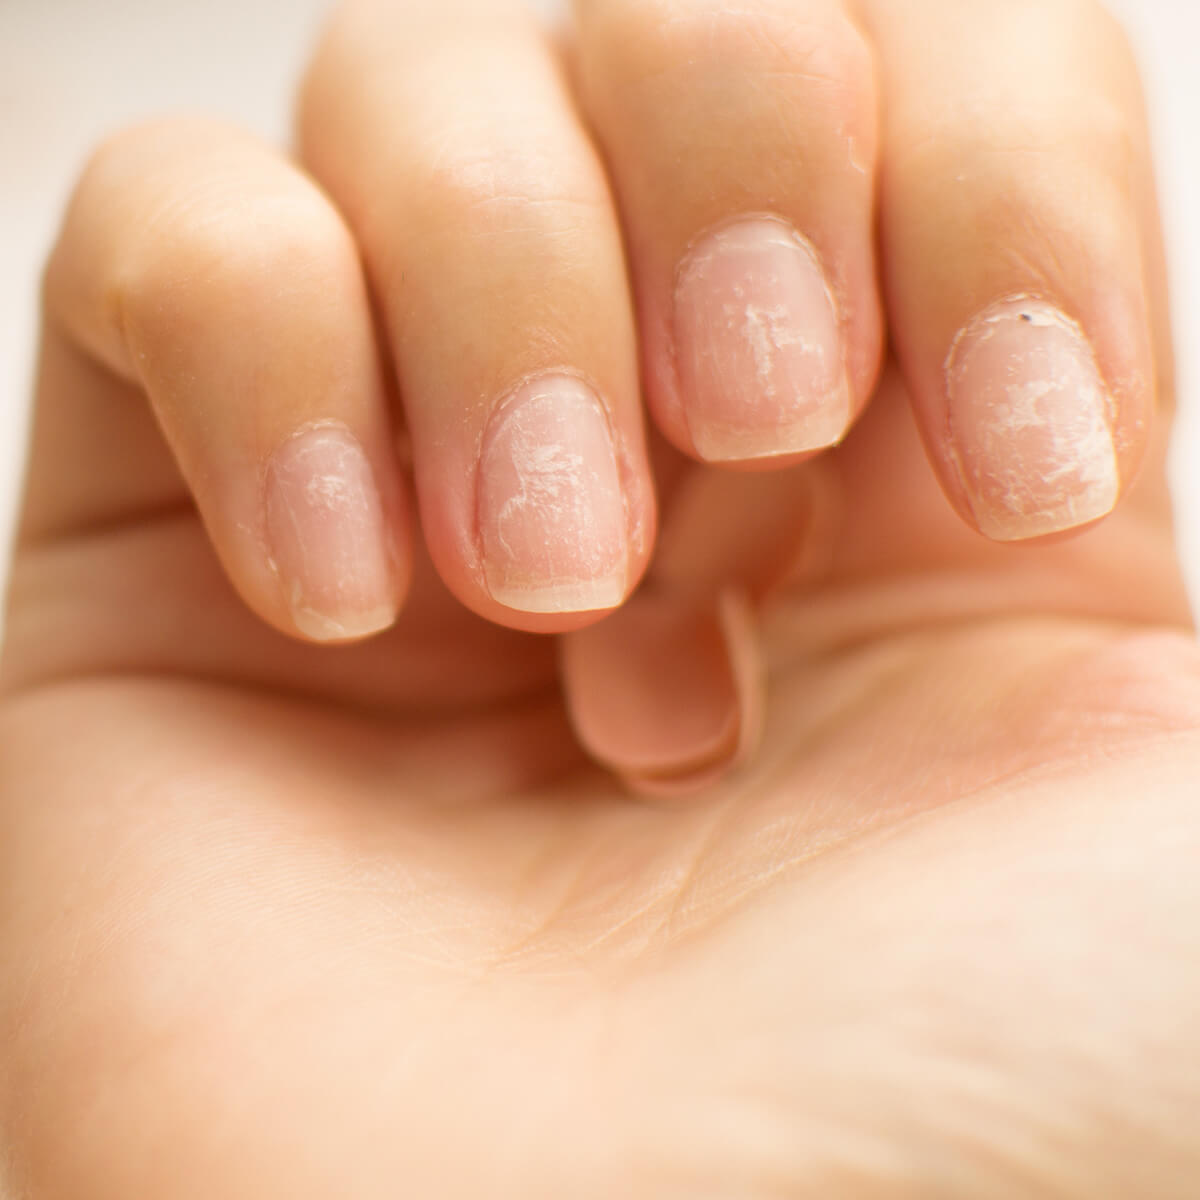 Skincare FAQs | What Your Nails are Saying About Your Health